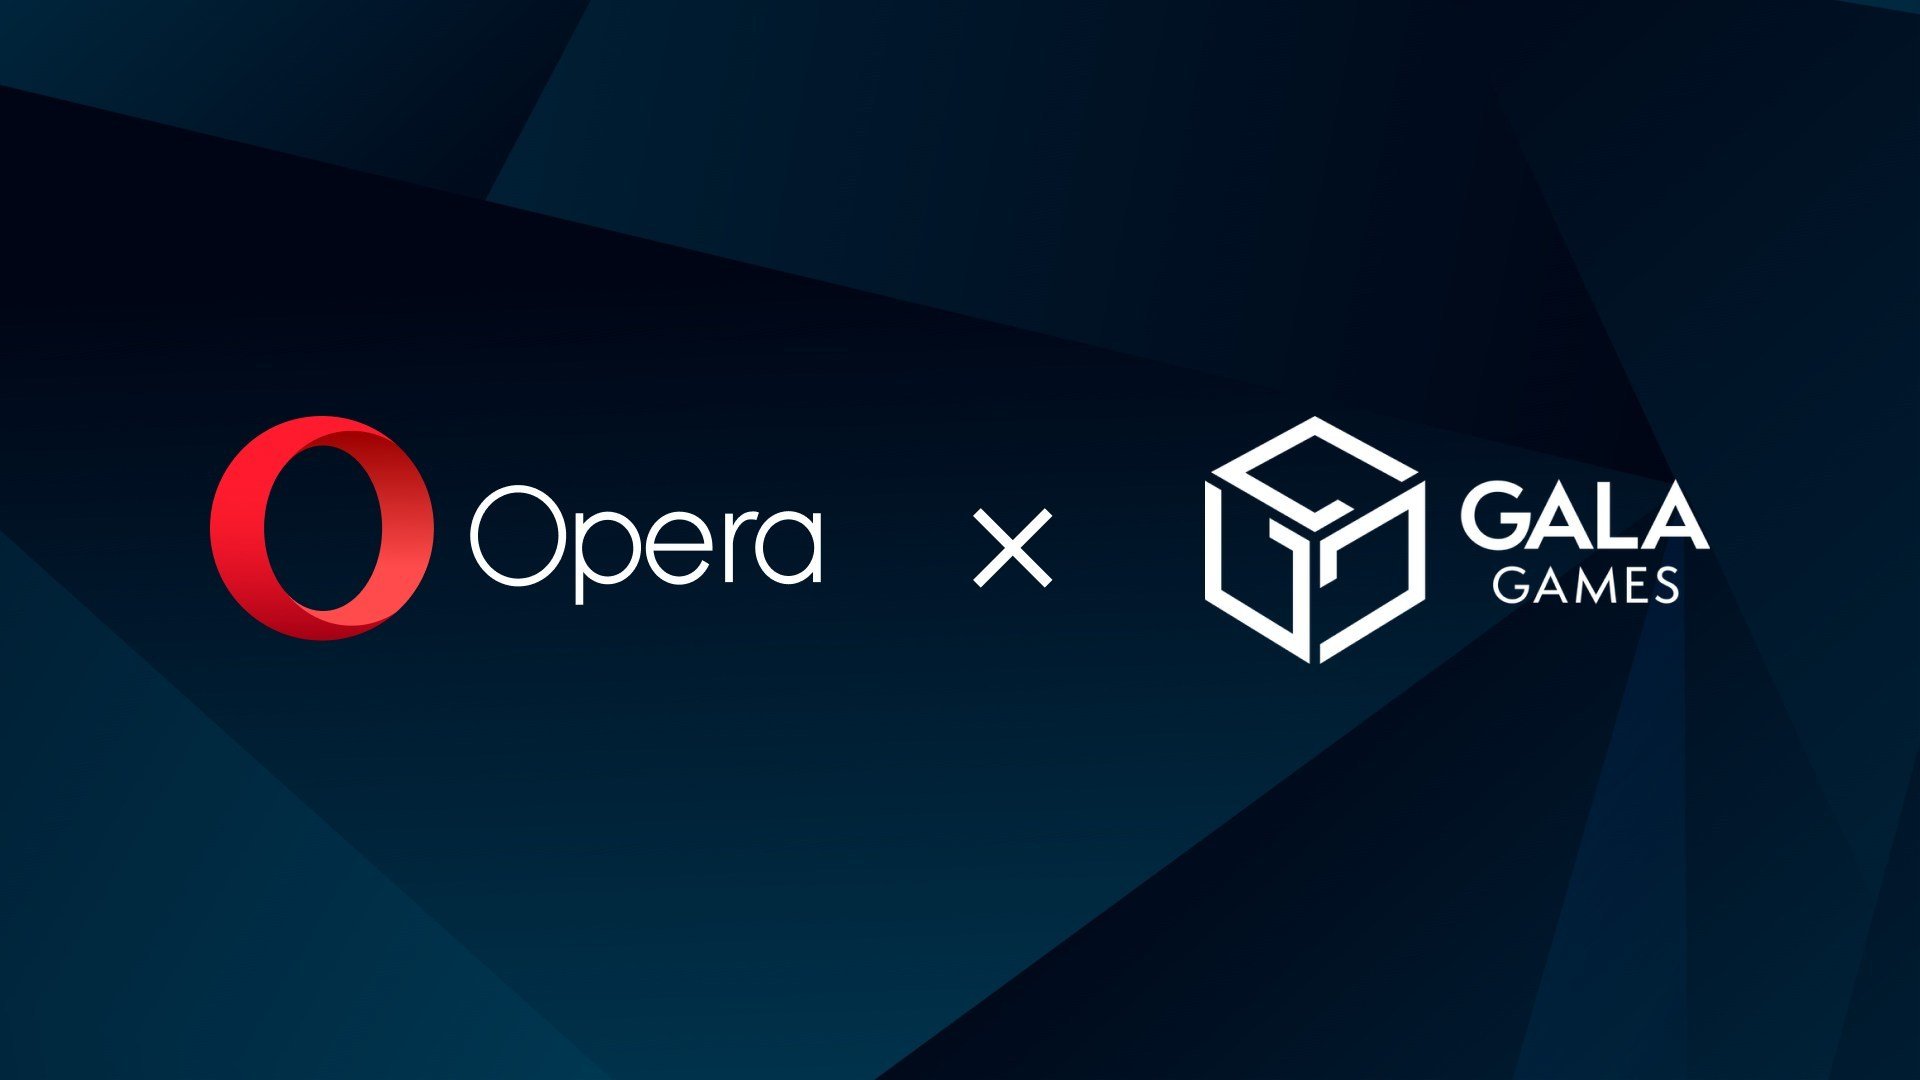 Gala Games And Opera Browser Deepen Partnership For ...